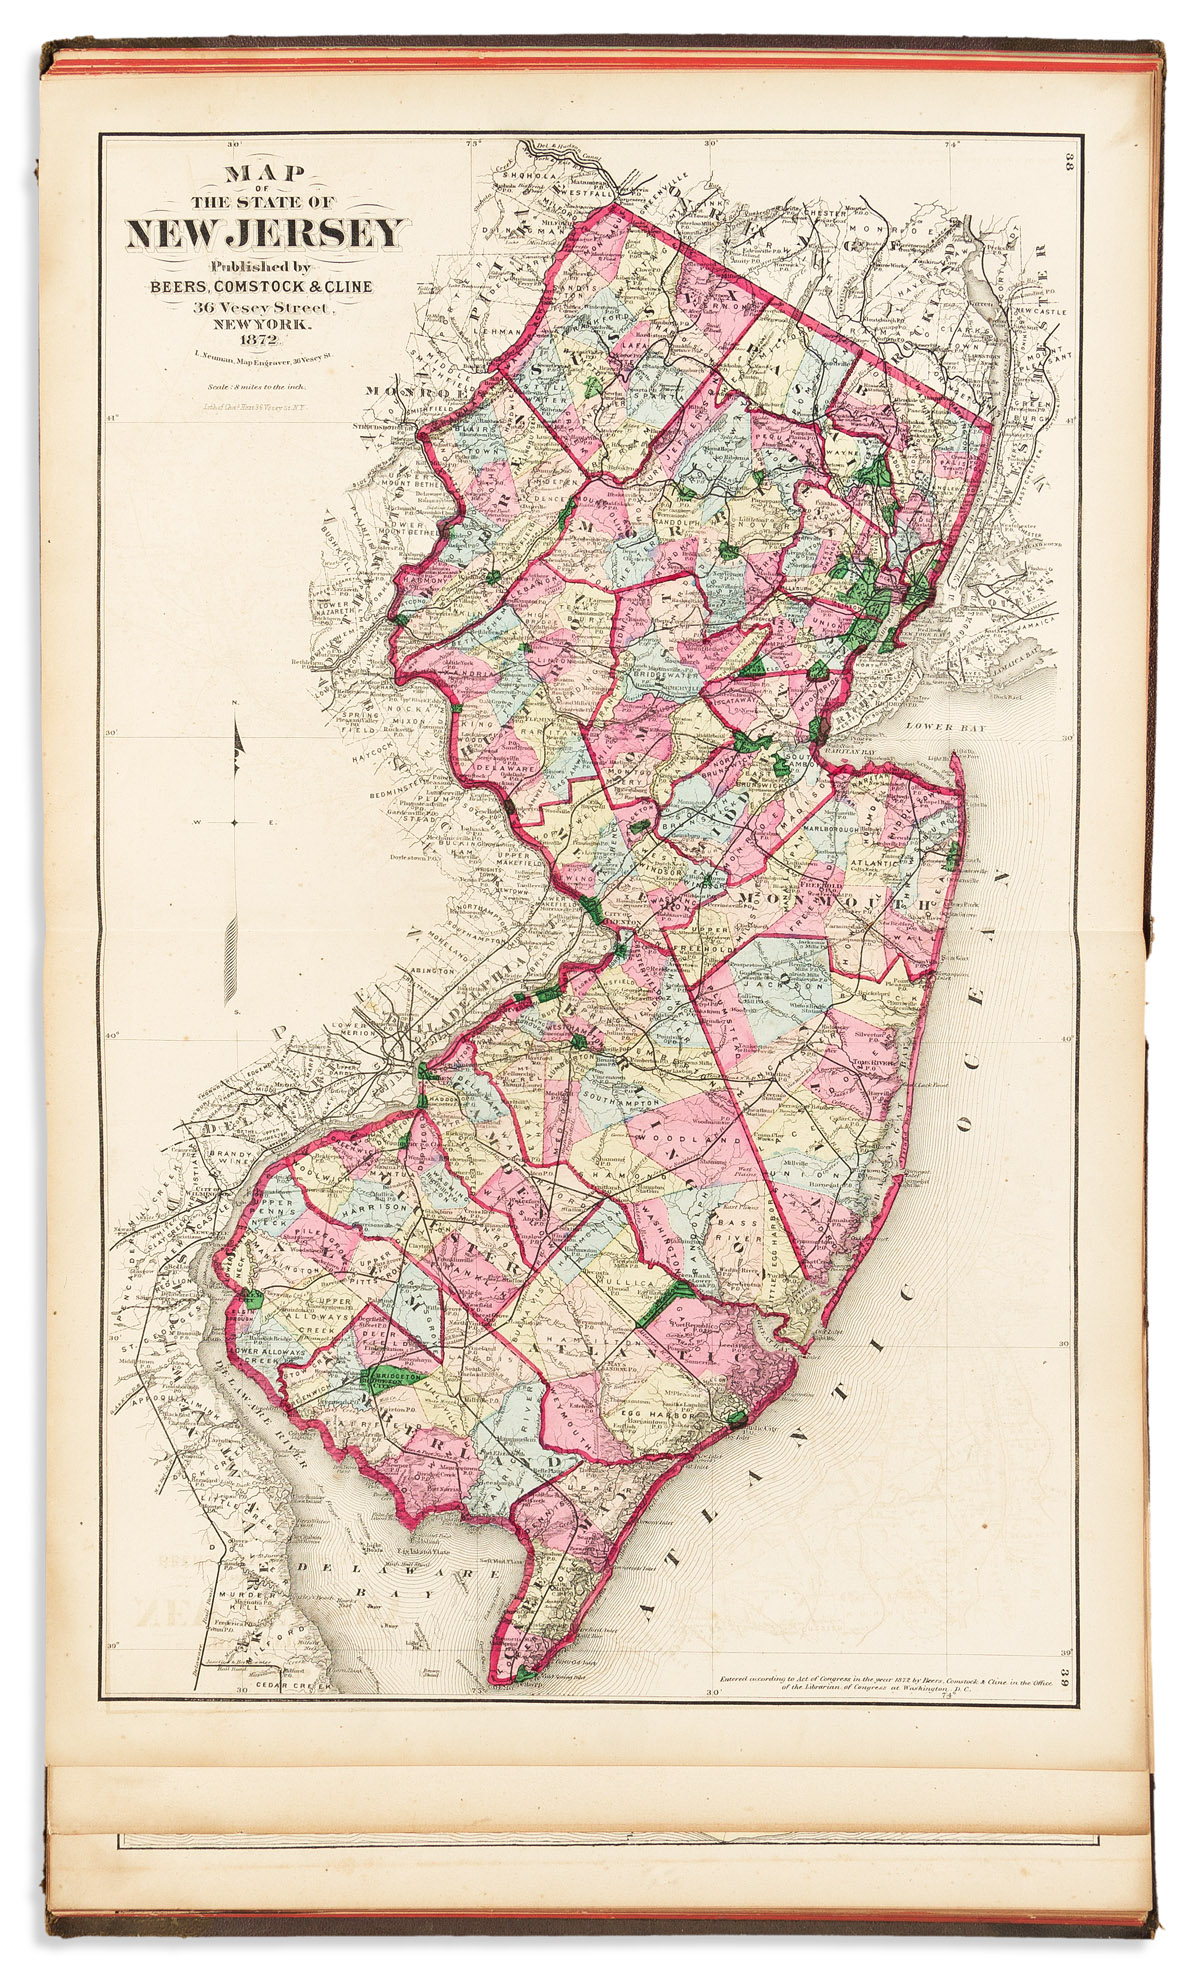 State Atlas of New Jersey.